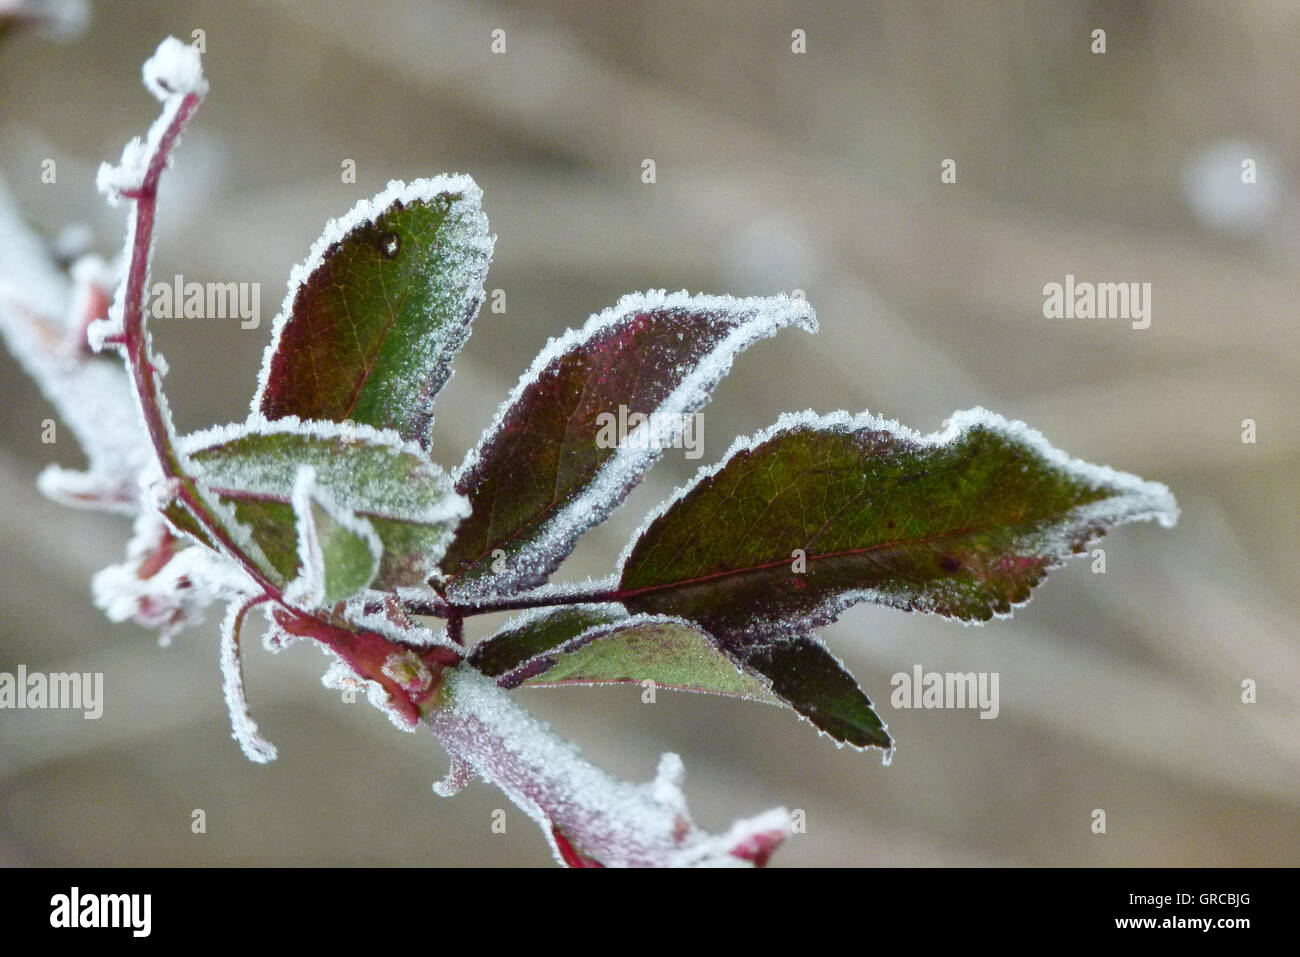 Twig With Leaves Coated By Hoarfrost Stock Photo